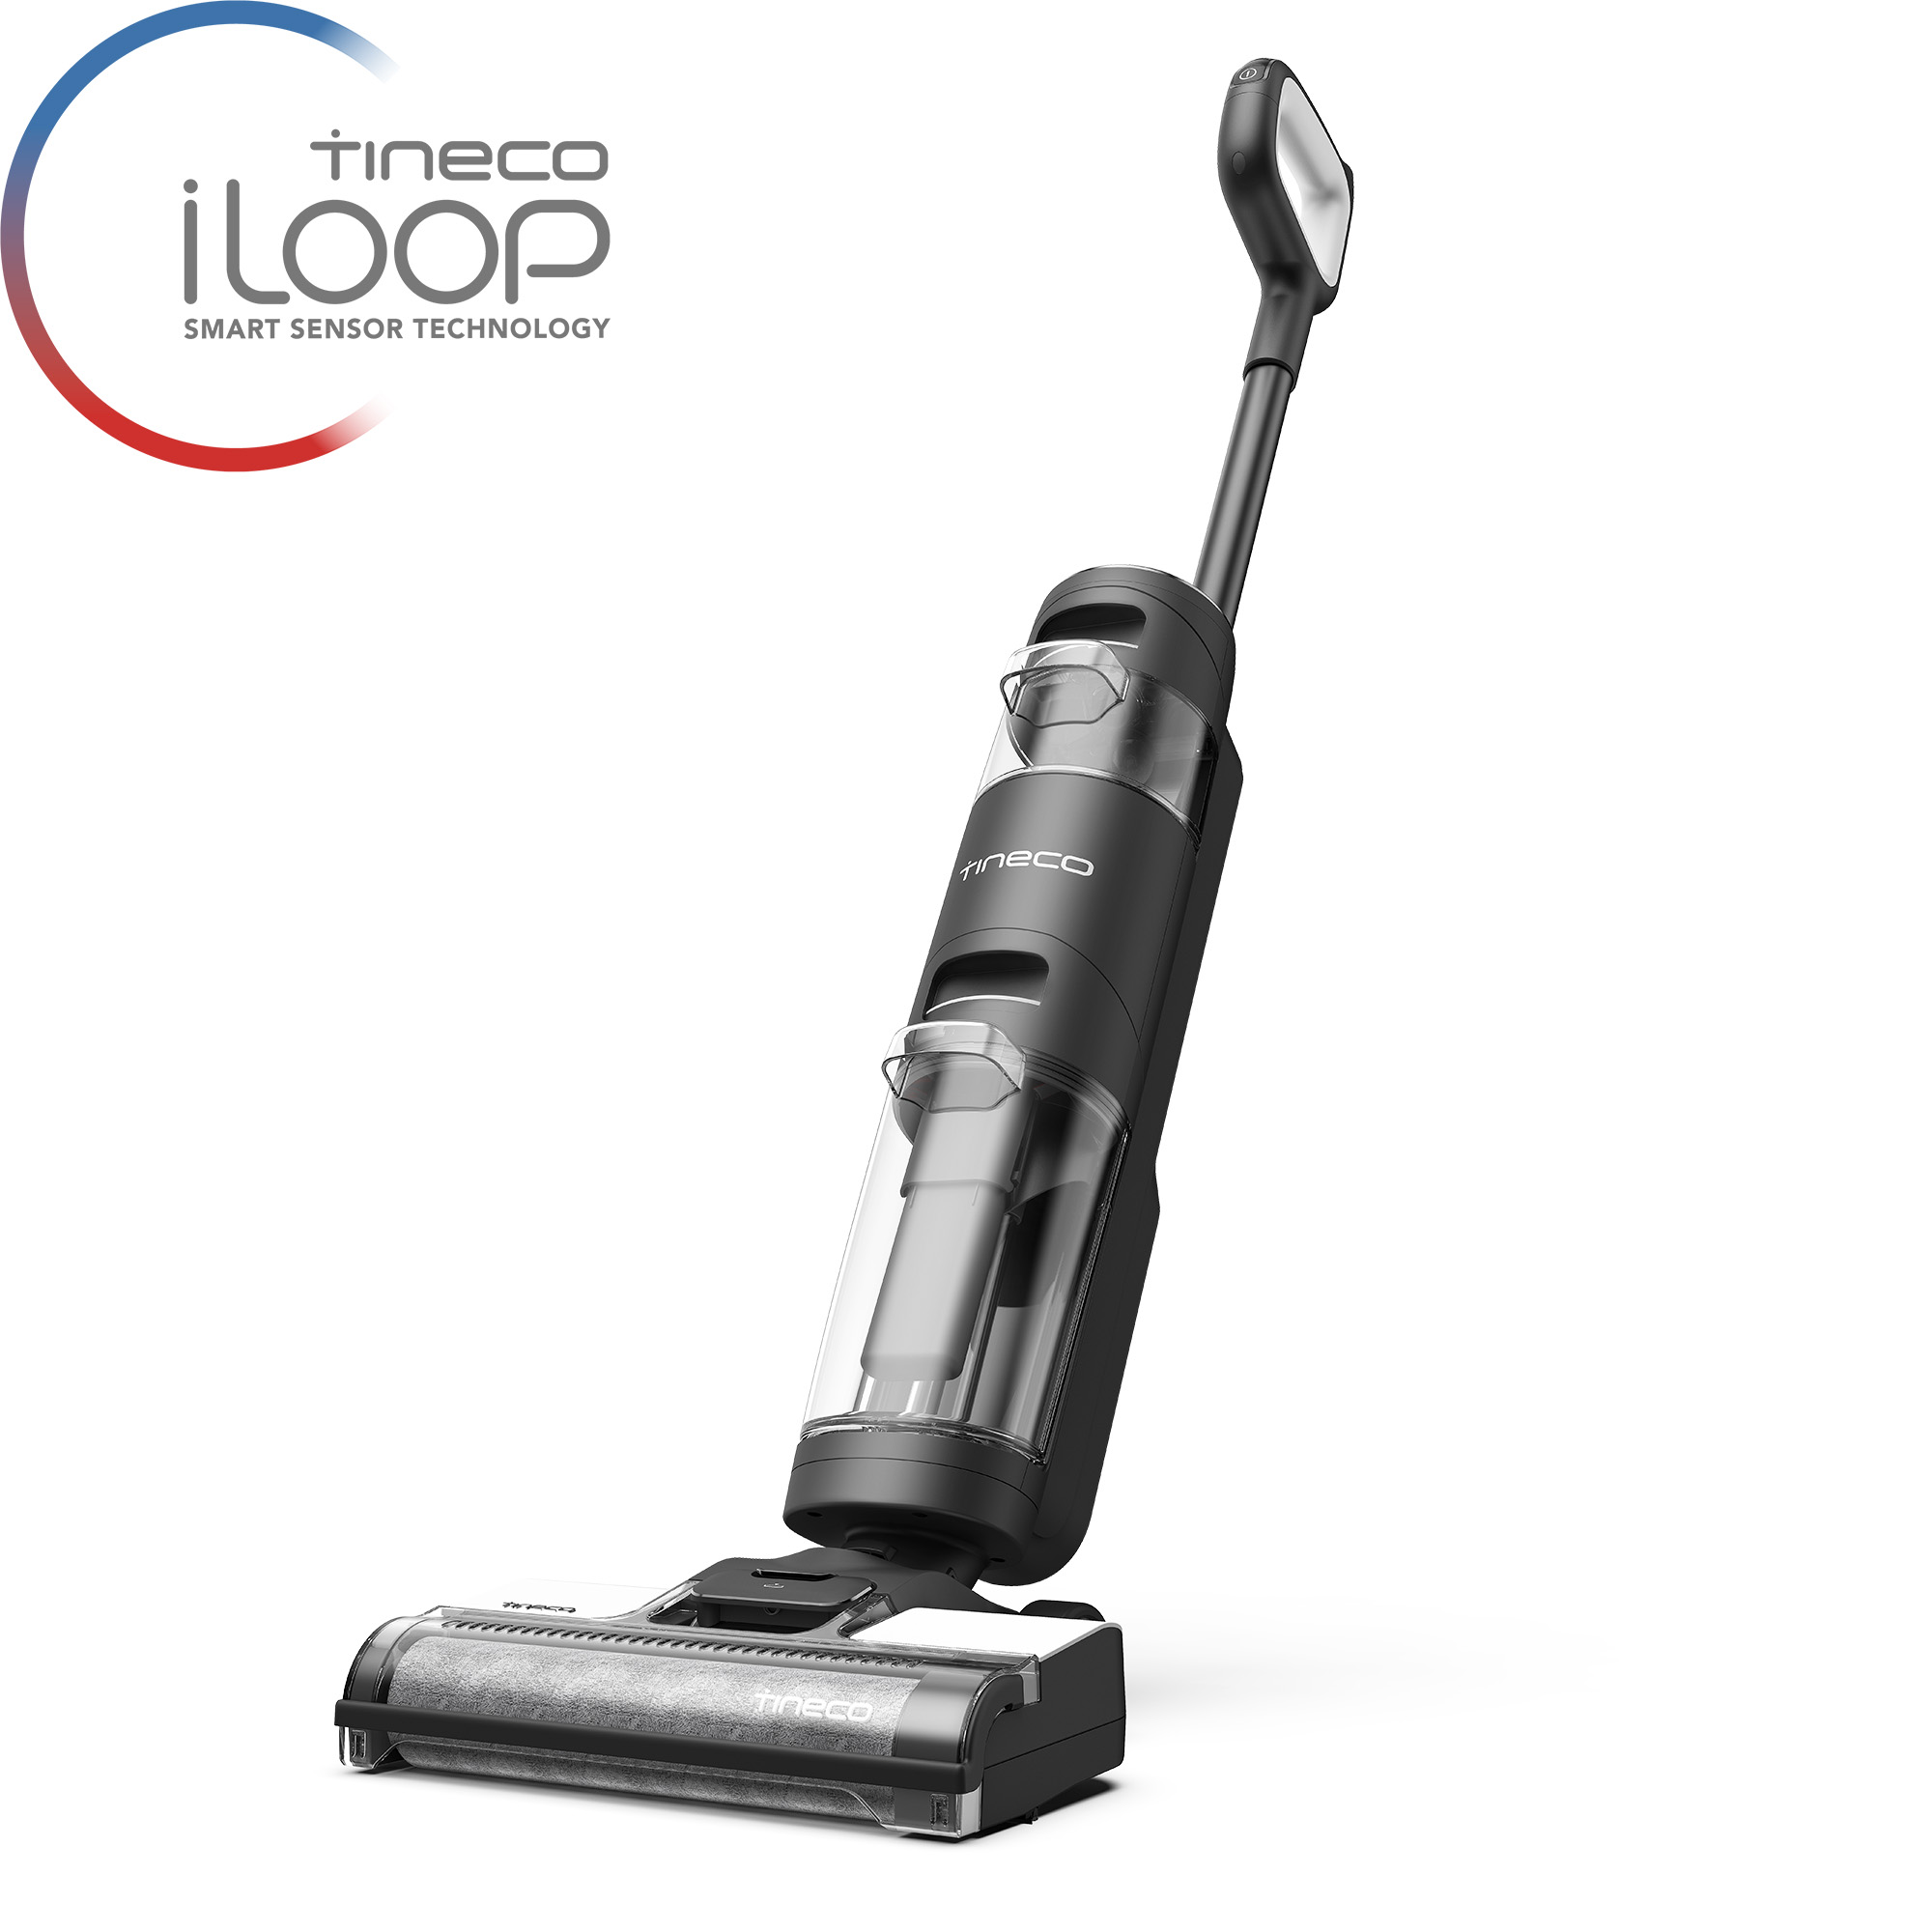 Tineco FLOOR ONE S2 Smart Cordless Wet/Dry Vacuum Cleaner and Floor Washer - Black - image 1 of 11